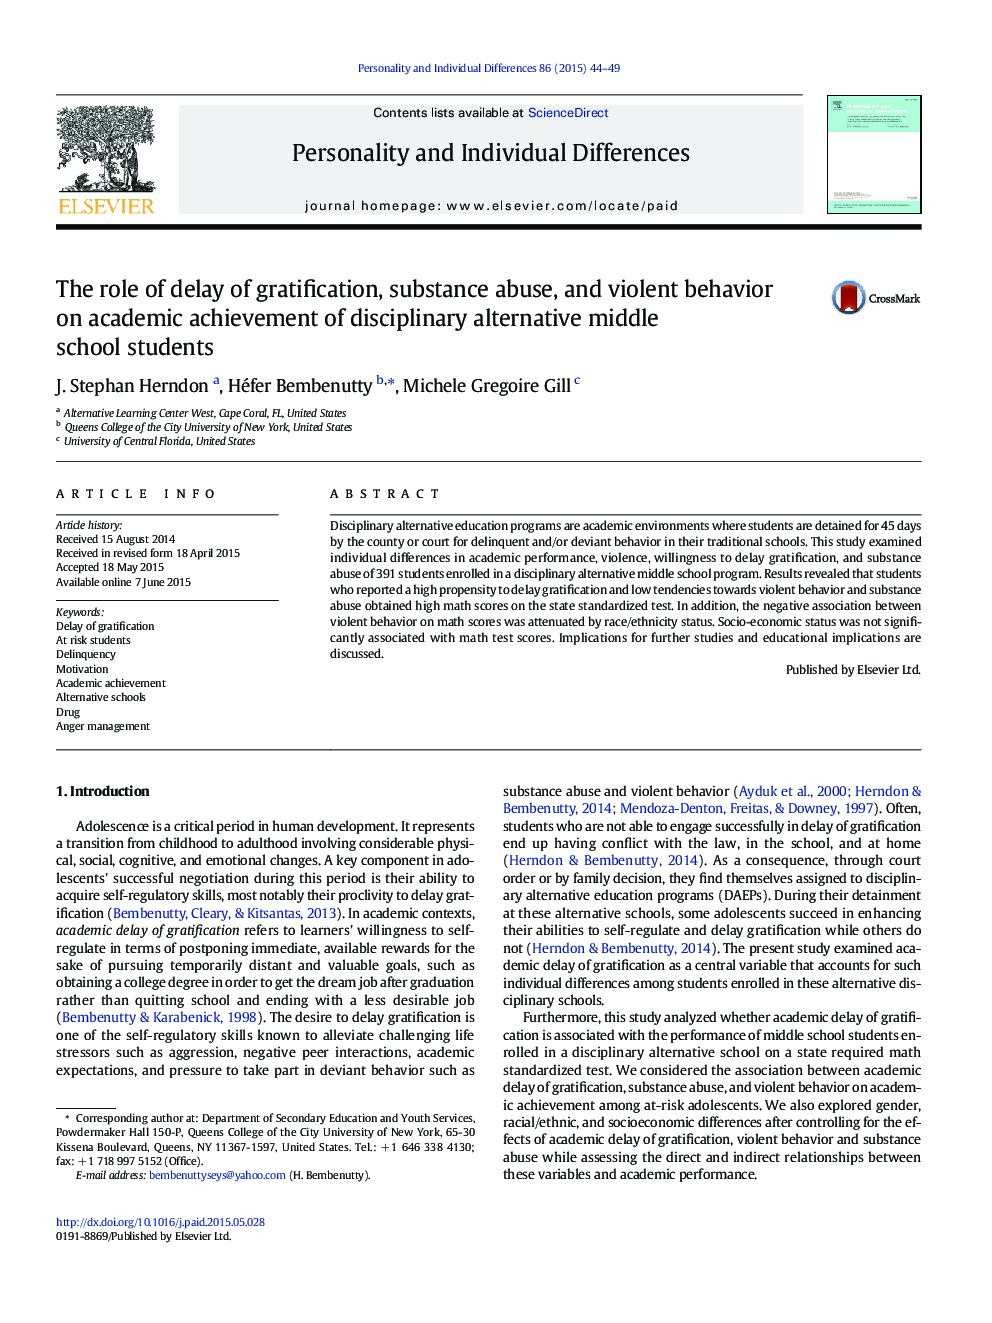 The role of delay of gratification, substance abuse, and violent behavior on academic achievement of disciplinary alternative middle school students